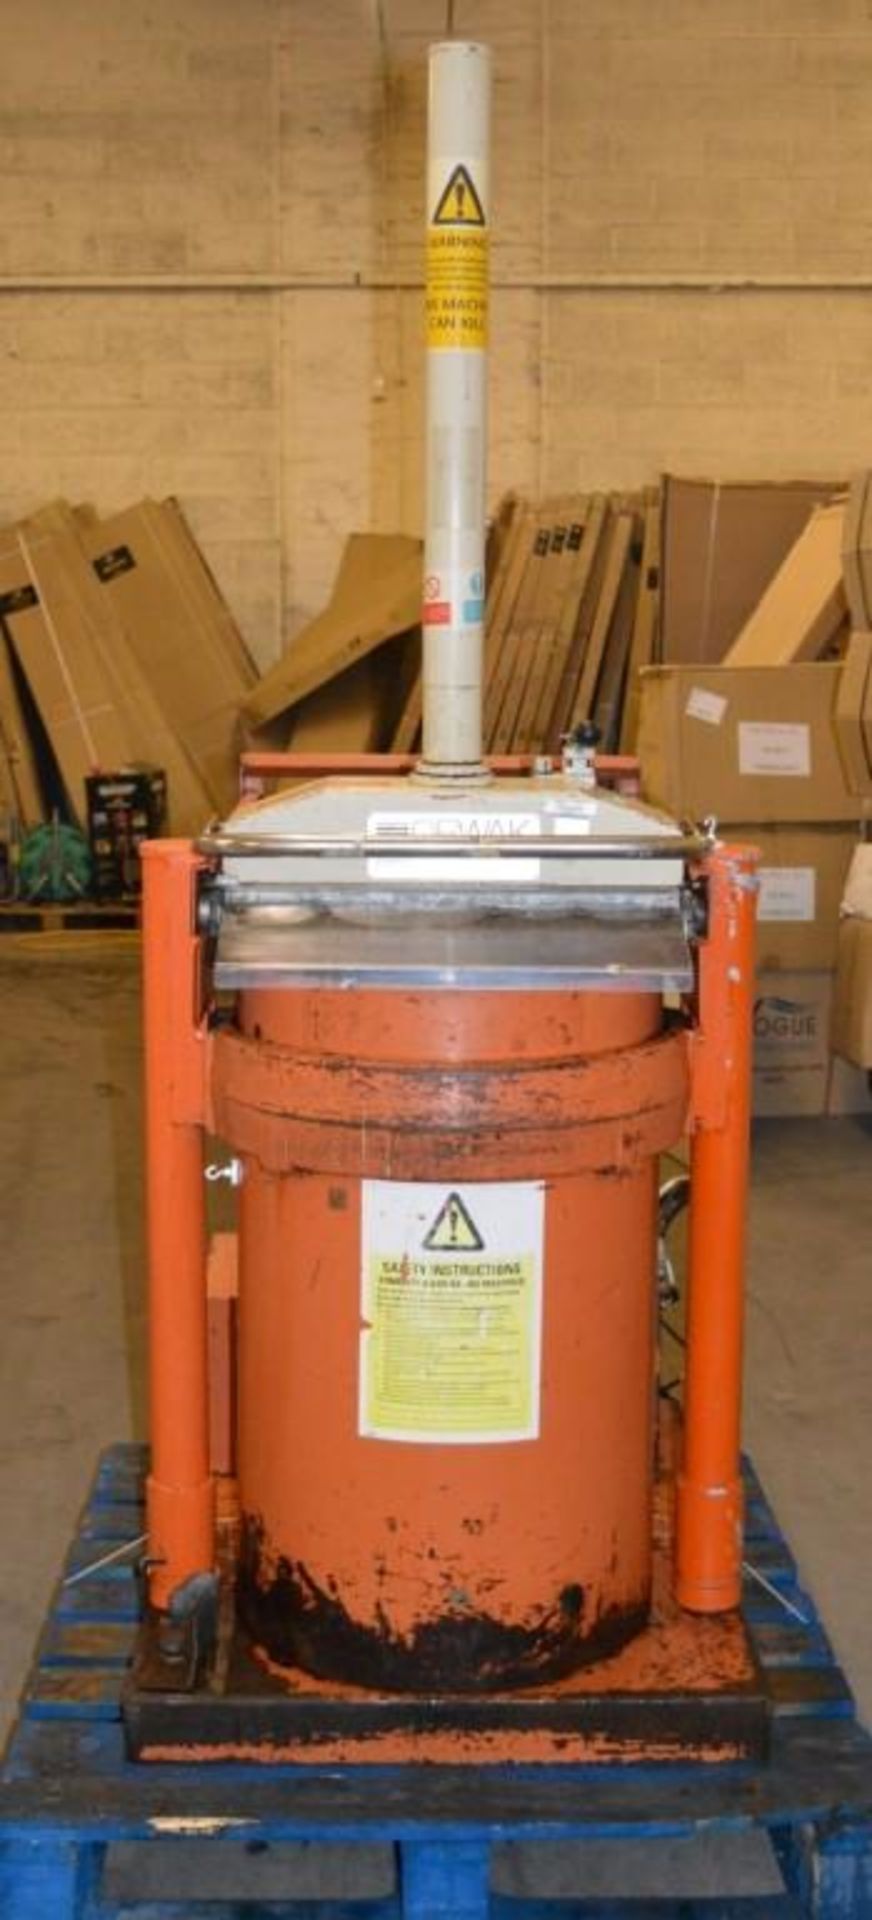 1 x Orwak 5030 Waste Compactor Bailer - Used For Compacting Recyclable or Non-Recyclable Waste